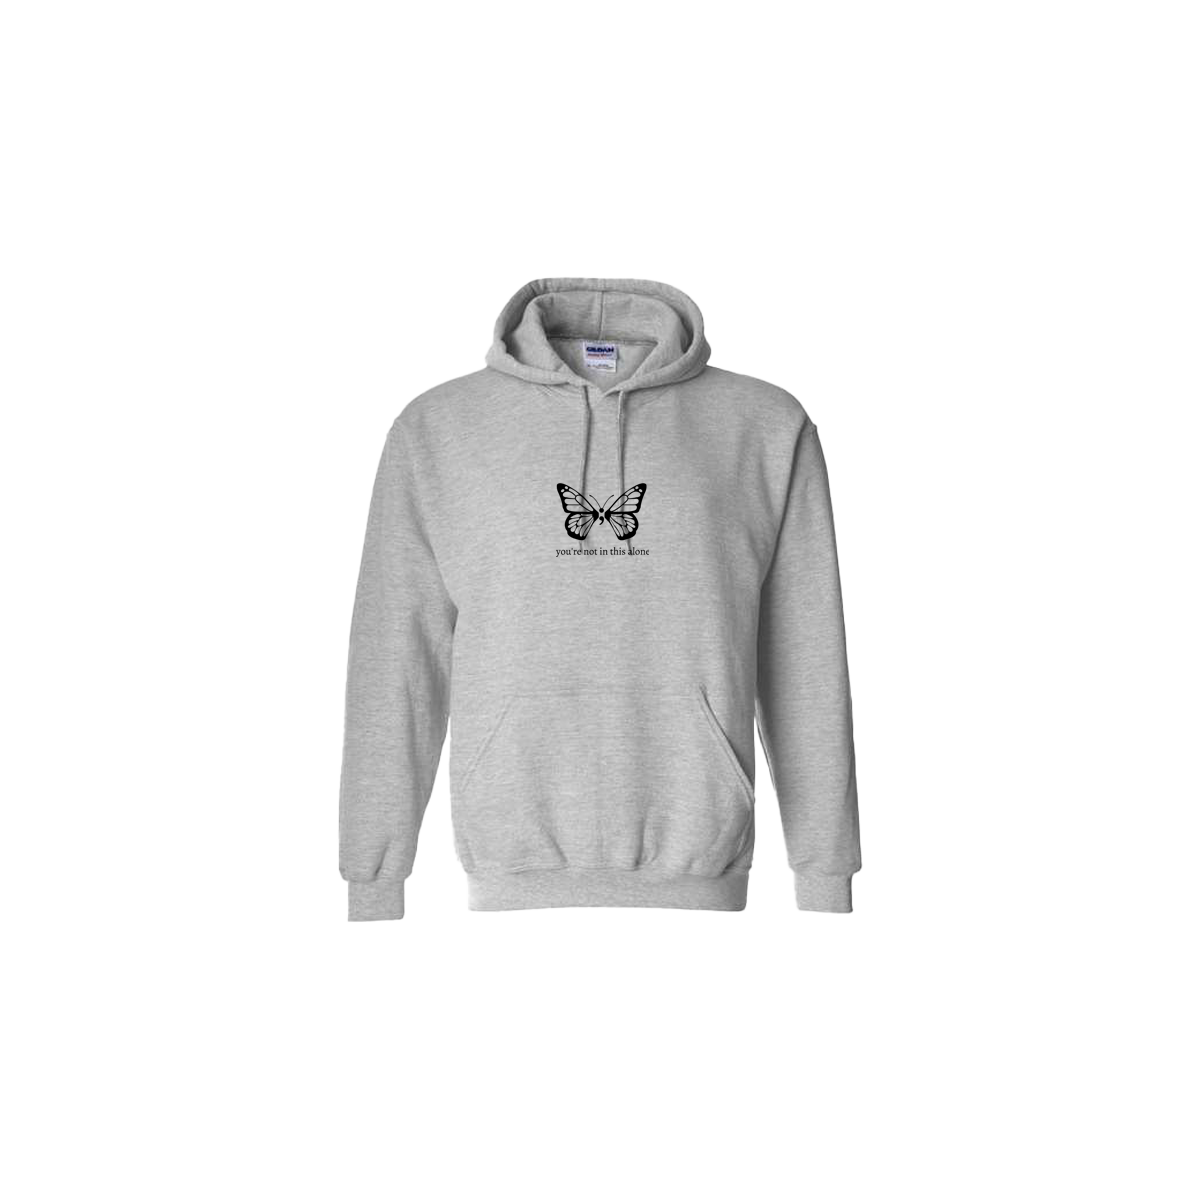 You're Not In This Alone Butterfly Embroidered Grey Hoodie - Mental Health Awareness Clothing